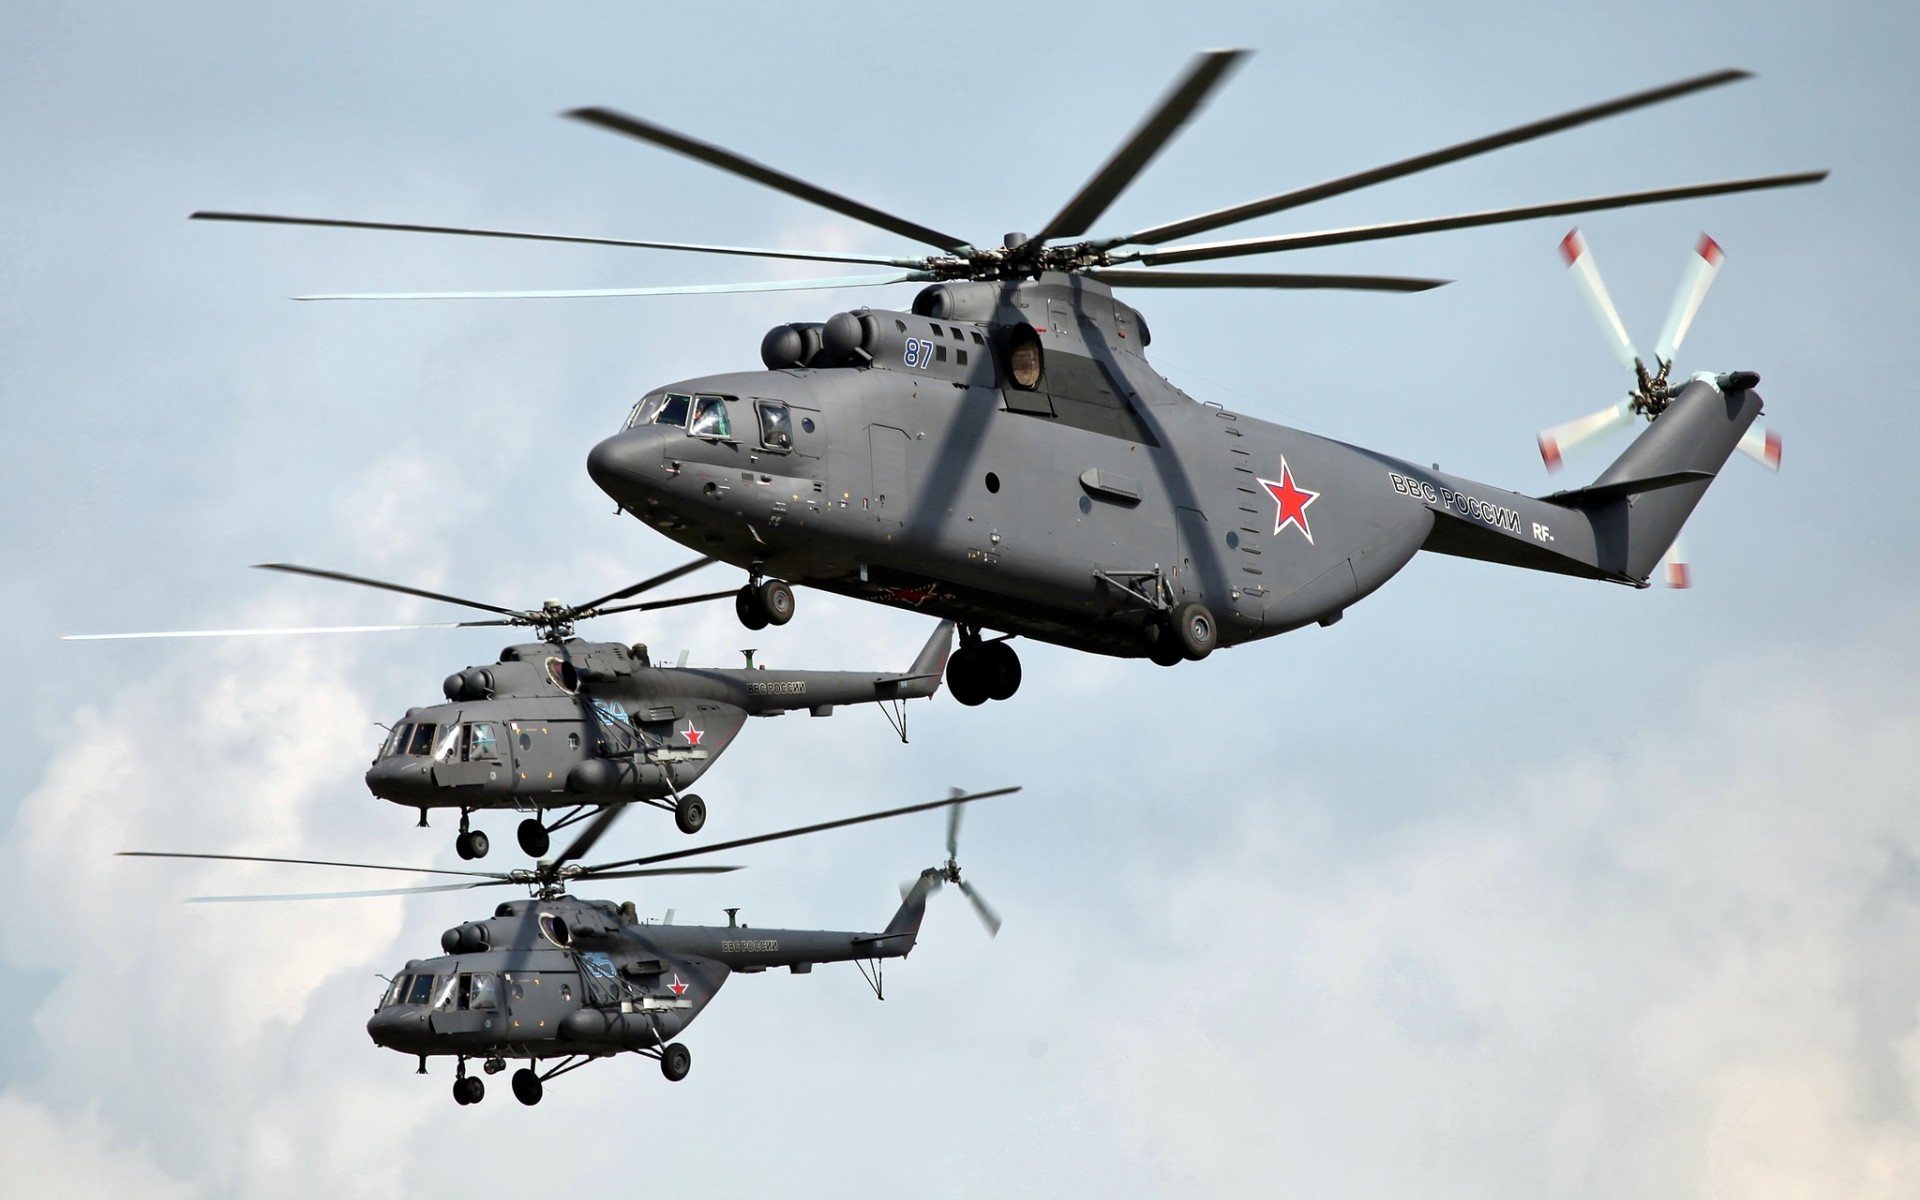 General 1920x1200 helicopters Mil Mi-17 Mil Mi-26 Russian Air Force military aircraft vehicle military vehicle aircraft Russian/Soviet aircraft Mil Helicopters